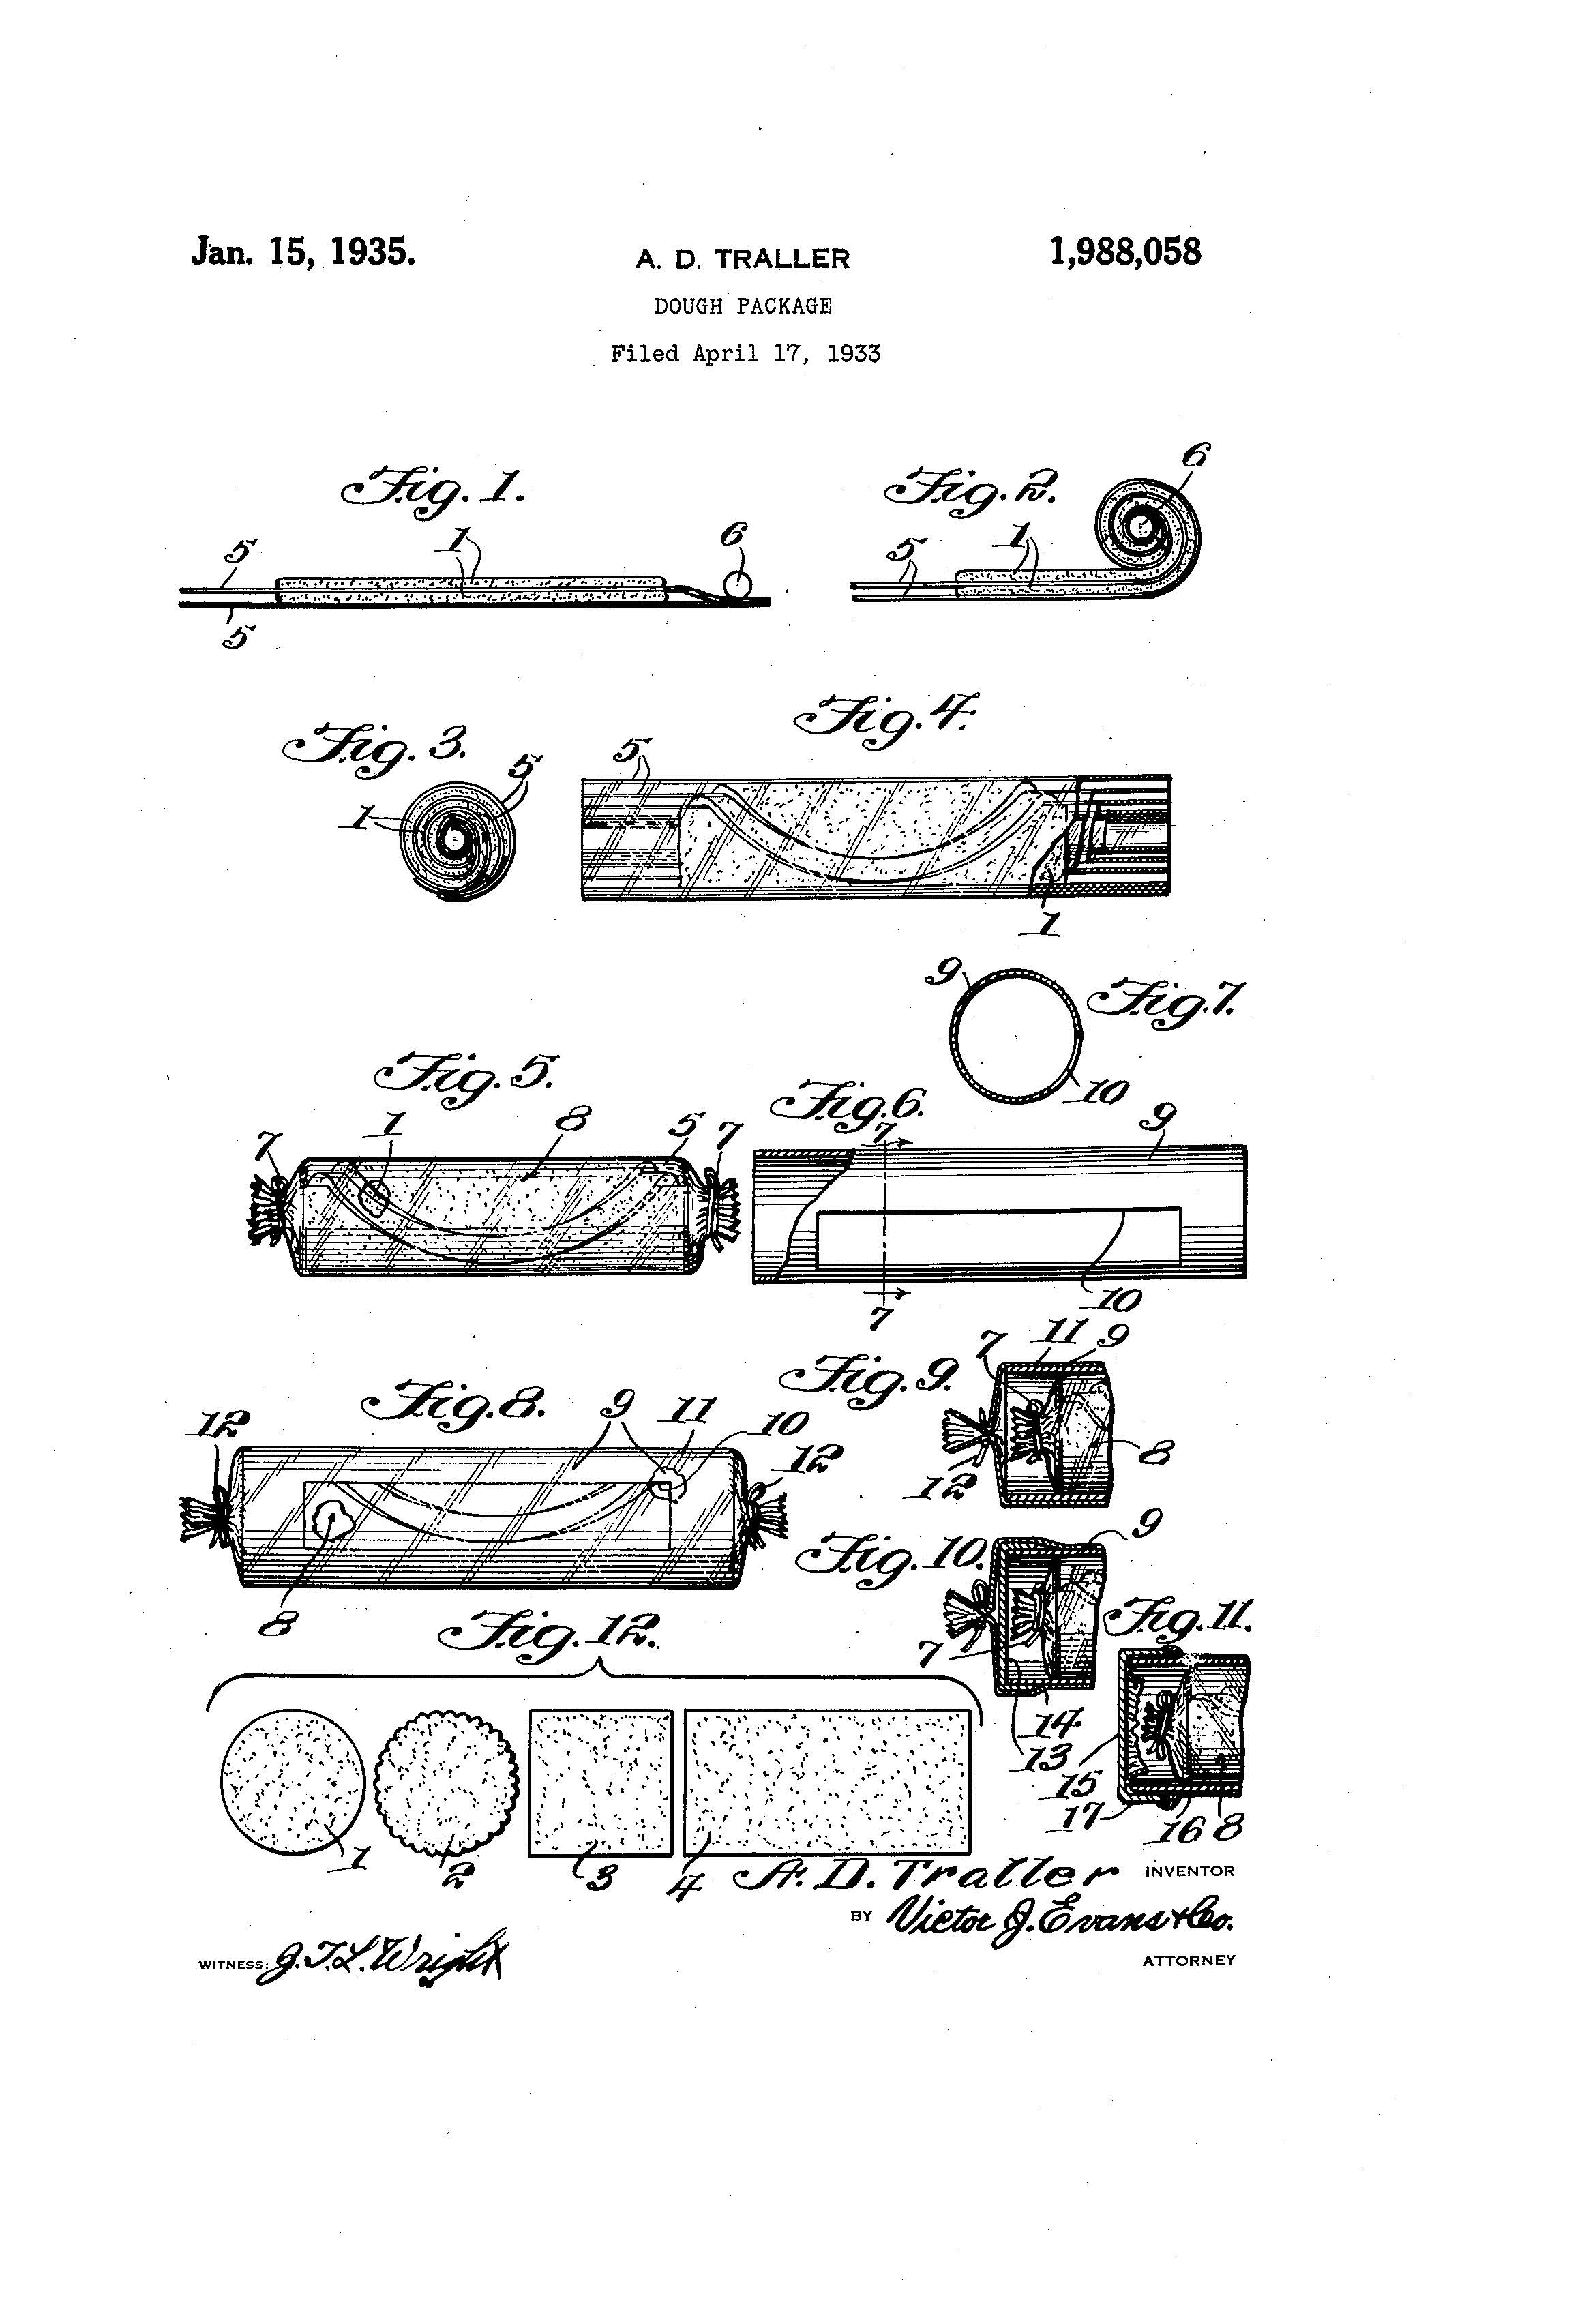 Dough Package Patent